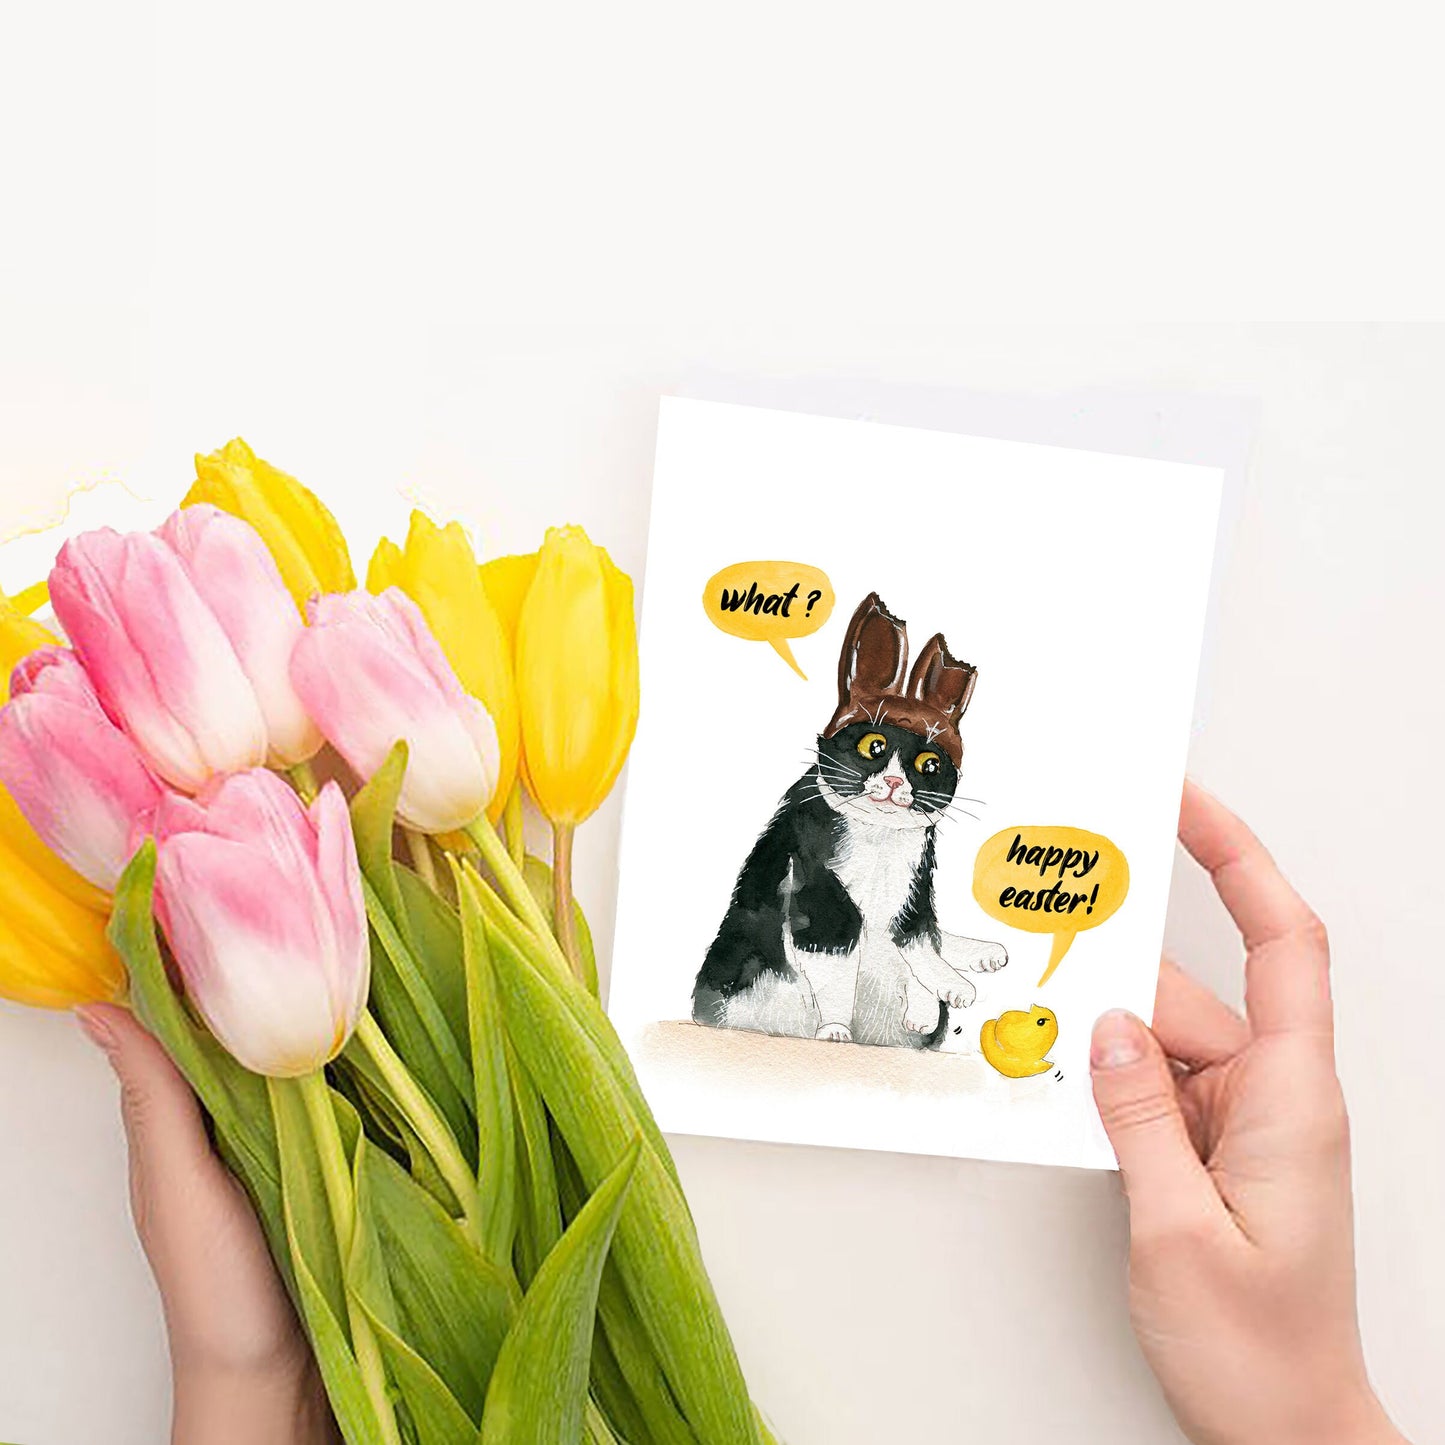 Naughty Cat Easter Cards For Kids - Funny Easter Card For Tuxedo Cats Lovers